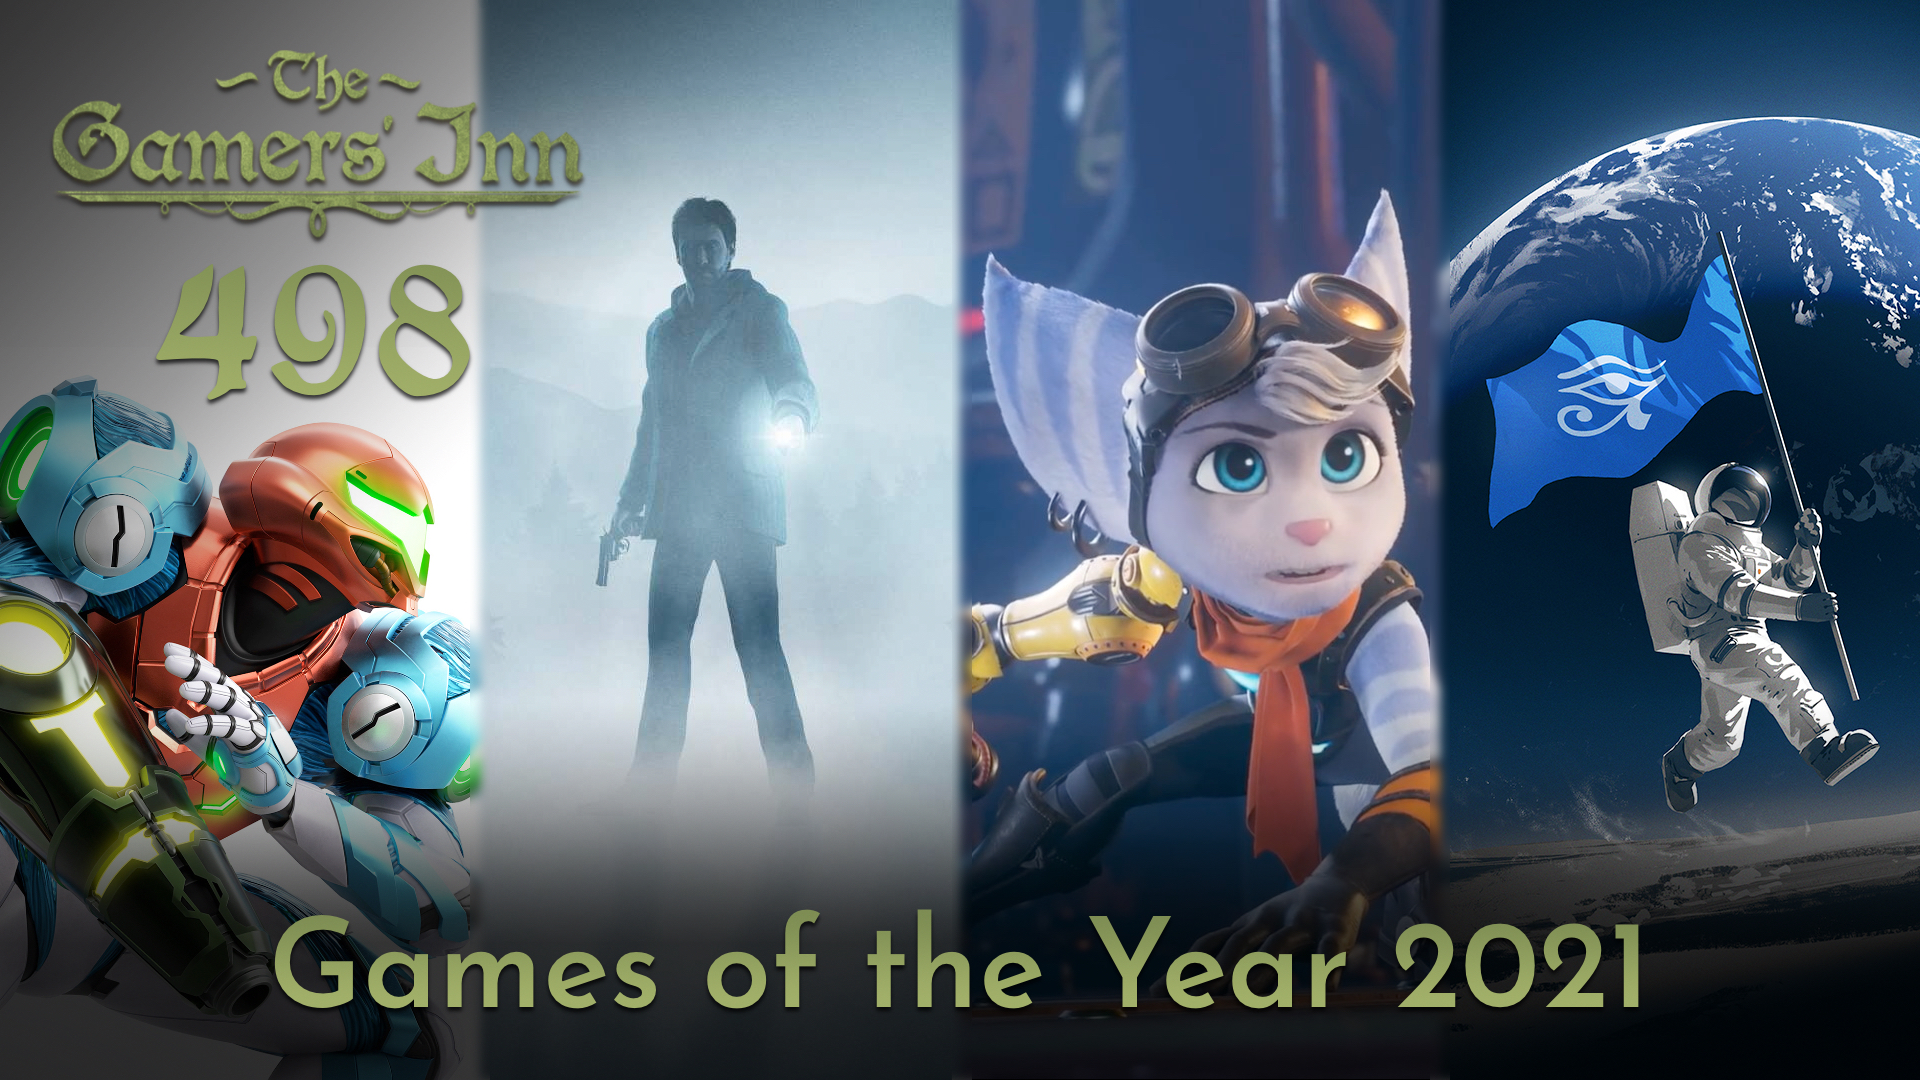 TGI 498 - Games of the Year 2021